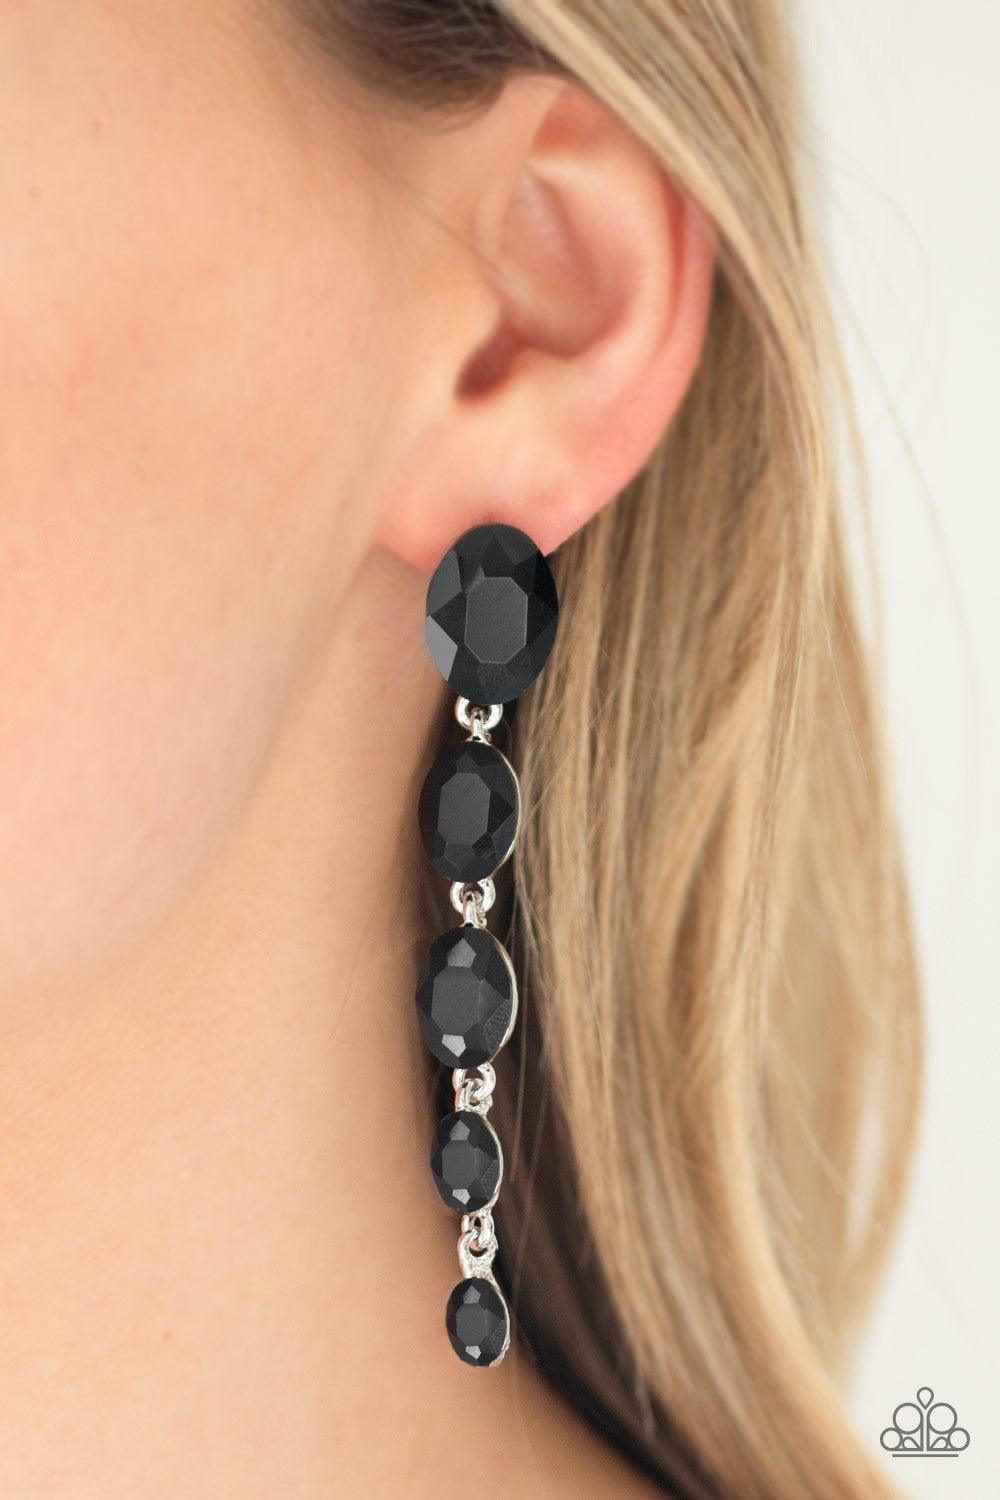 Paparazzi Accessories Red Carpet Radiance - Black Gradually decreasing in size, glittery black gems trickle from the ear in a glamorous fashion. Earring attaches to a standard post fitting. Jewelry